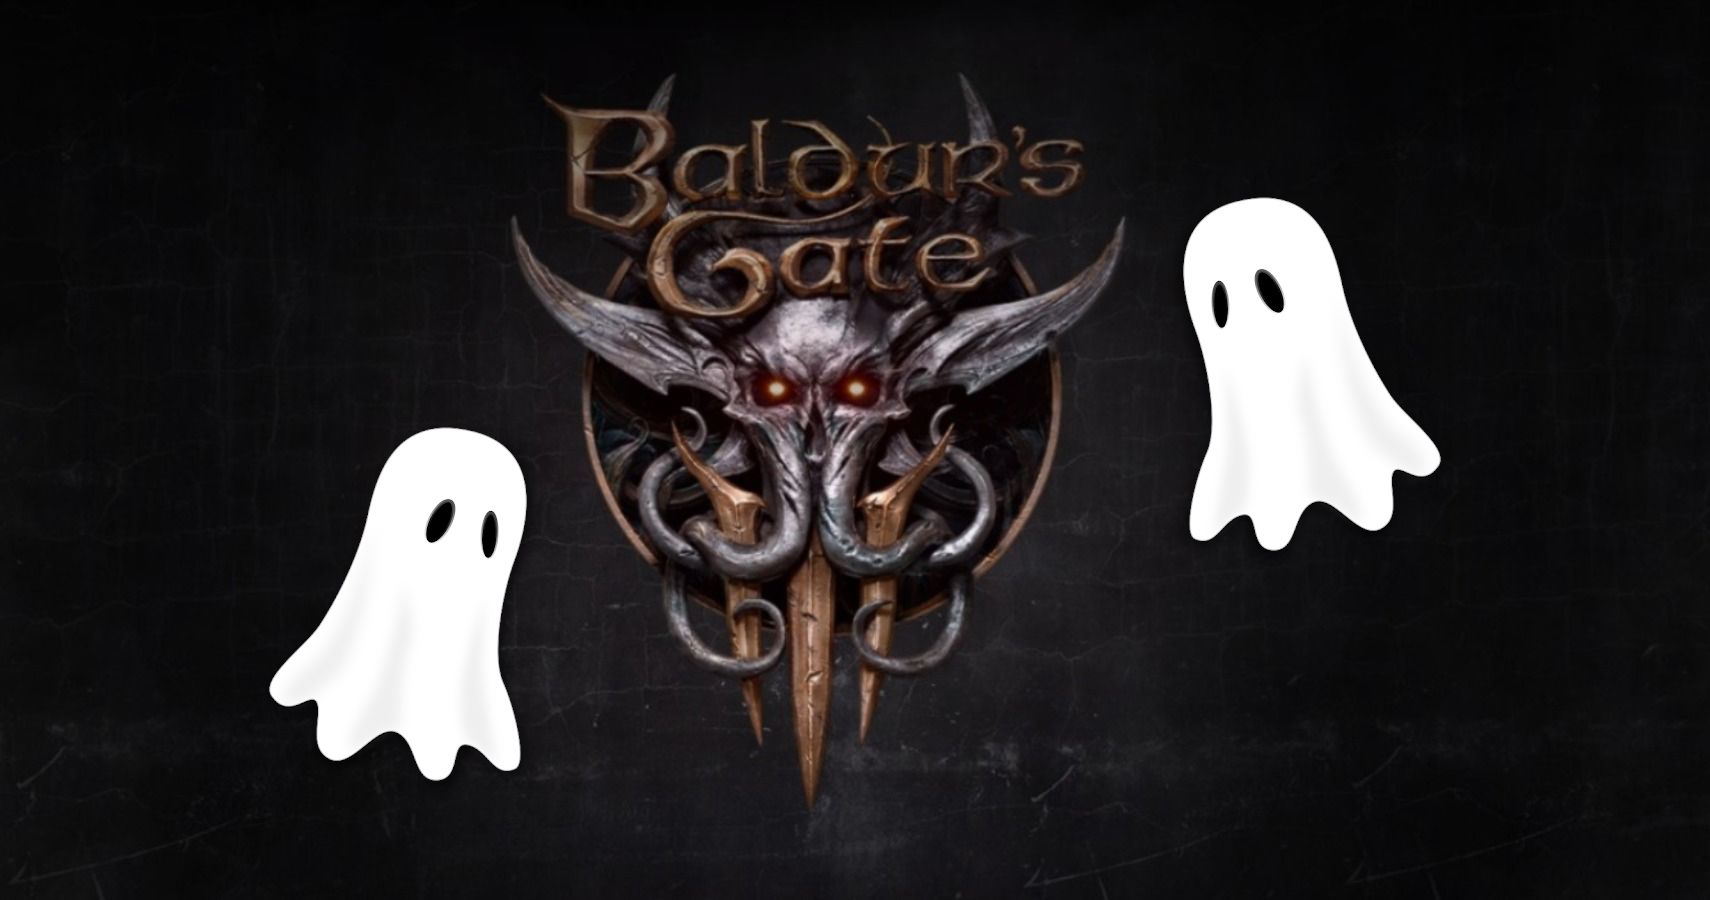 Baldurs Gate 3 Will Let You Speak To Every Corpse In The Game